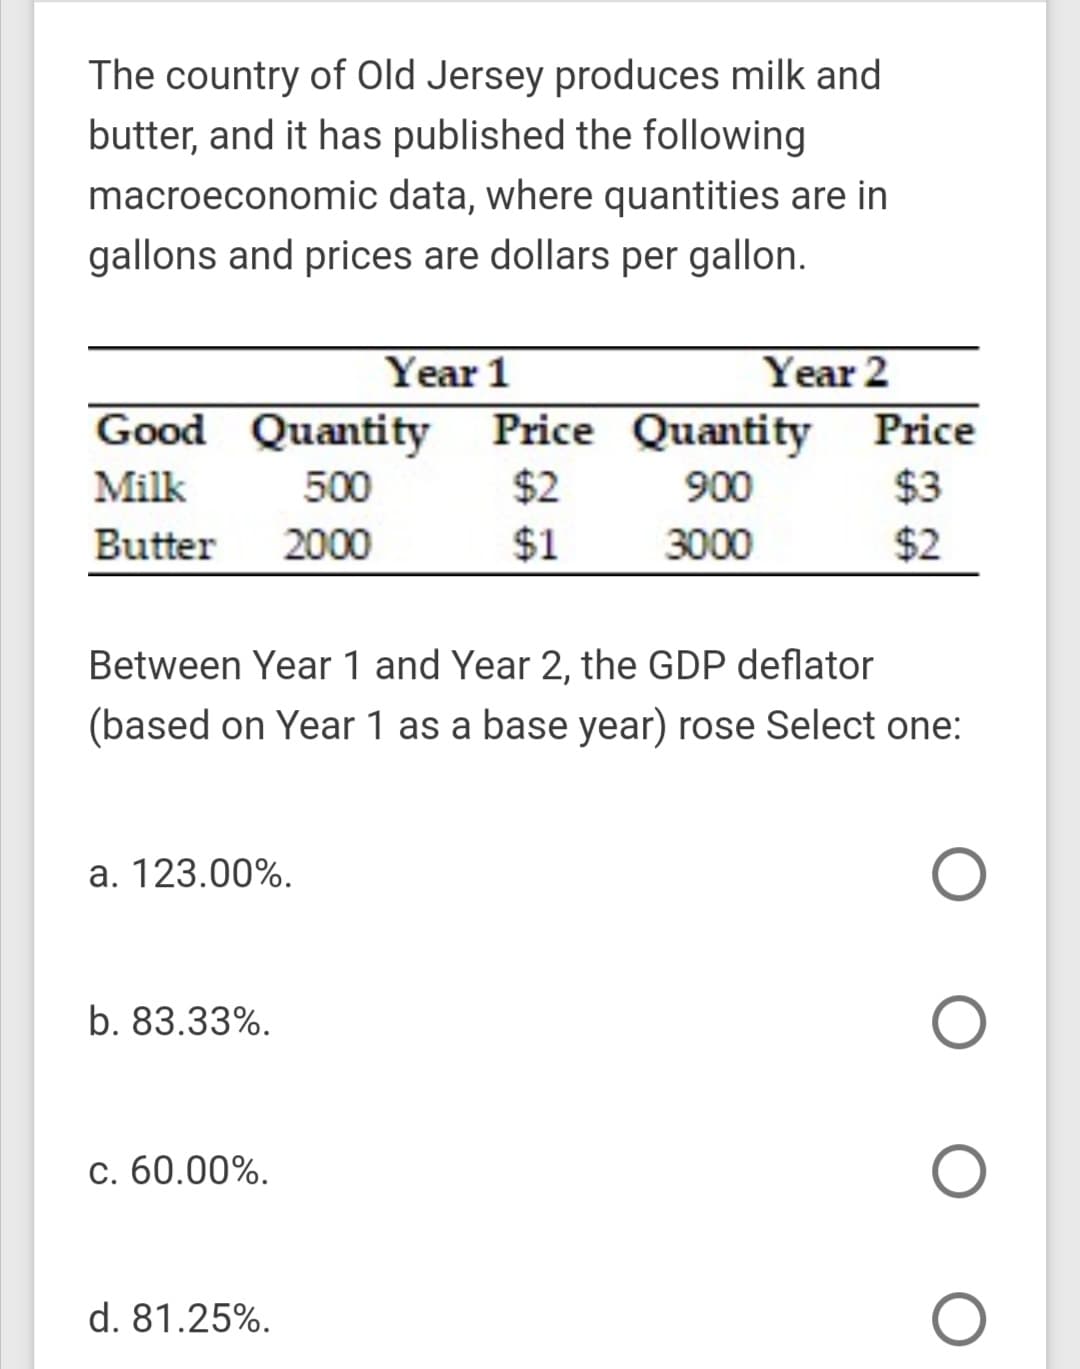 The country of Old Jersey produces milk and
butter, and it has published the following
macroeconomic data, where quantities are in
gallons and prices are dollars per gallon.
Year 1
Year 2
Good Quantity
Price Quantity
Price
Milk
500
$2
900
$3
Butter
2000
$1
3000
$2
Between Year 1 and Year 2, the GDP deflator
(based on Year 1 as a base year) rose Select one:
a. 123.00%.
b. 83.33%.
c. 60.00%.
d. 81.25%.
